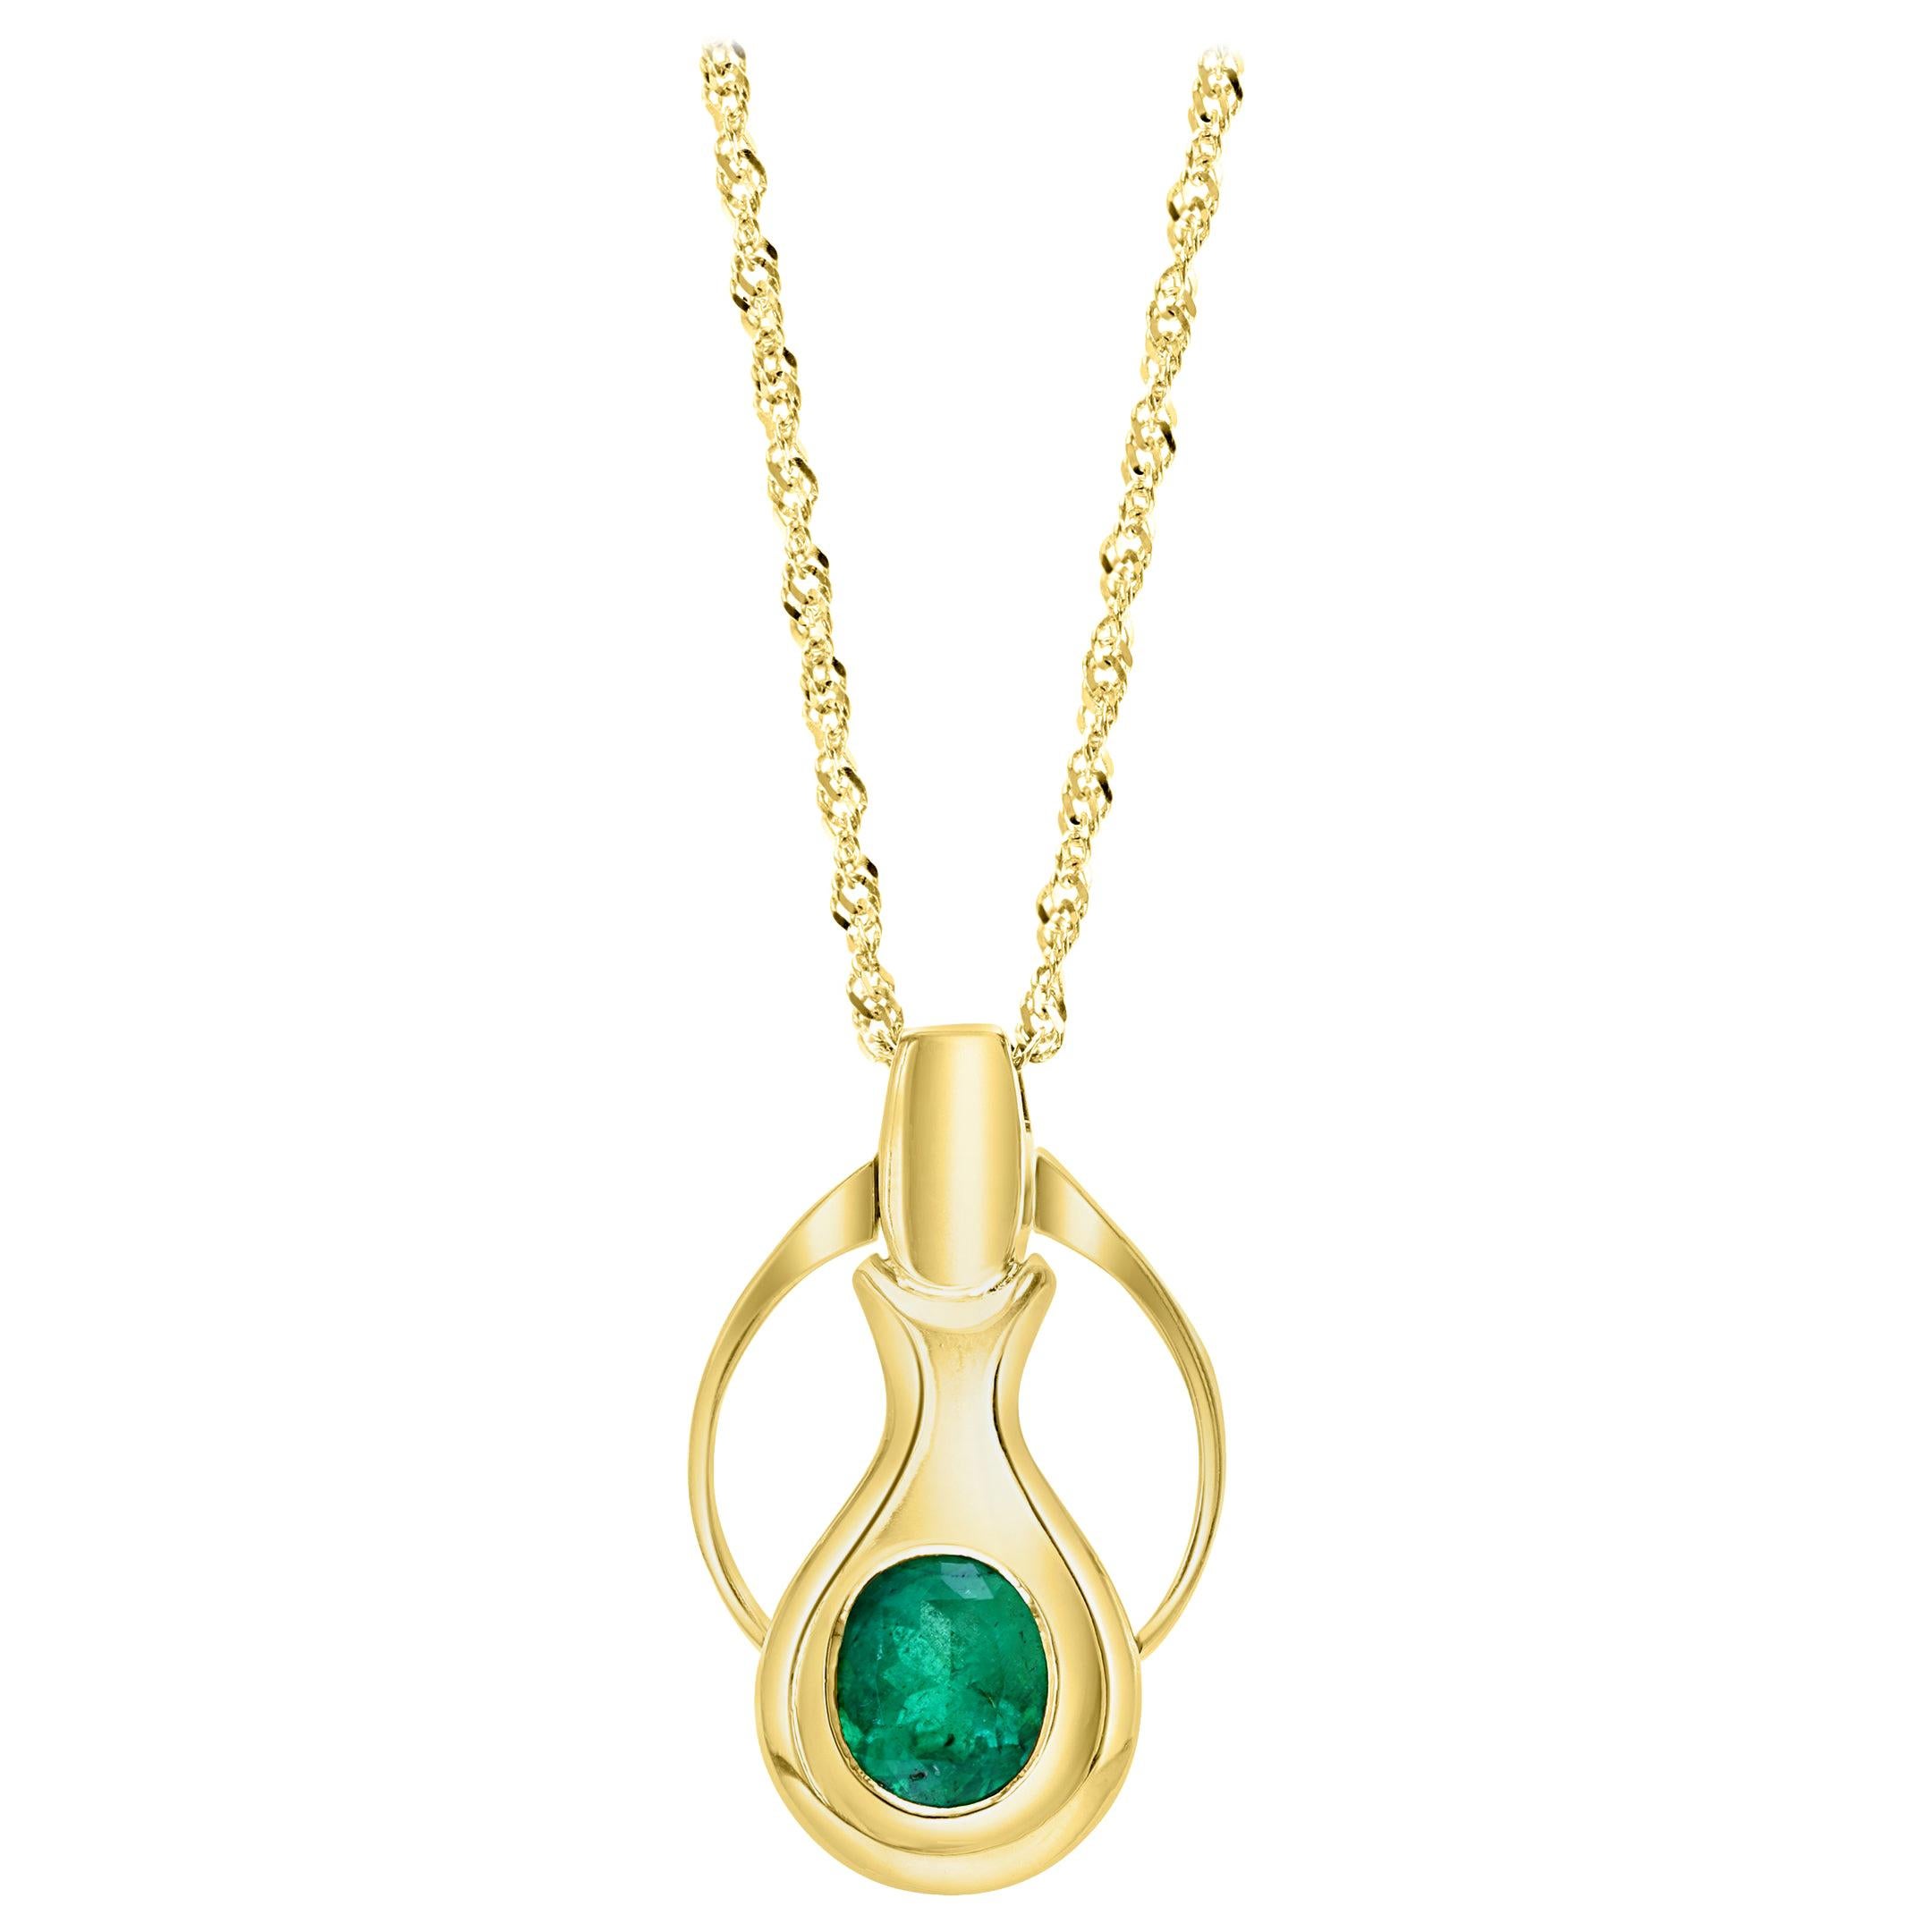 4Ct Colombian Emerald Pendent/Necklace 18 Karat Gold Estate Convertible to Ring For Sale